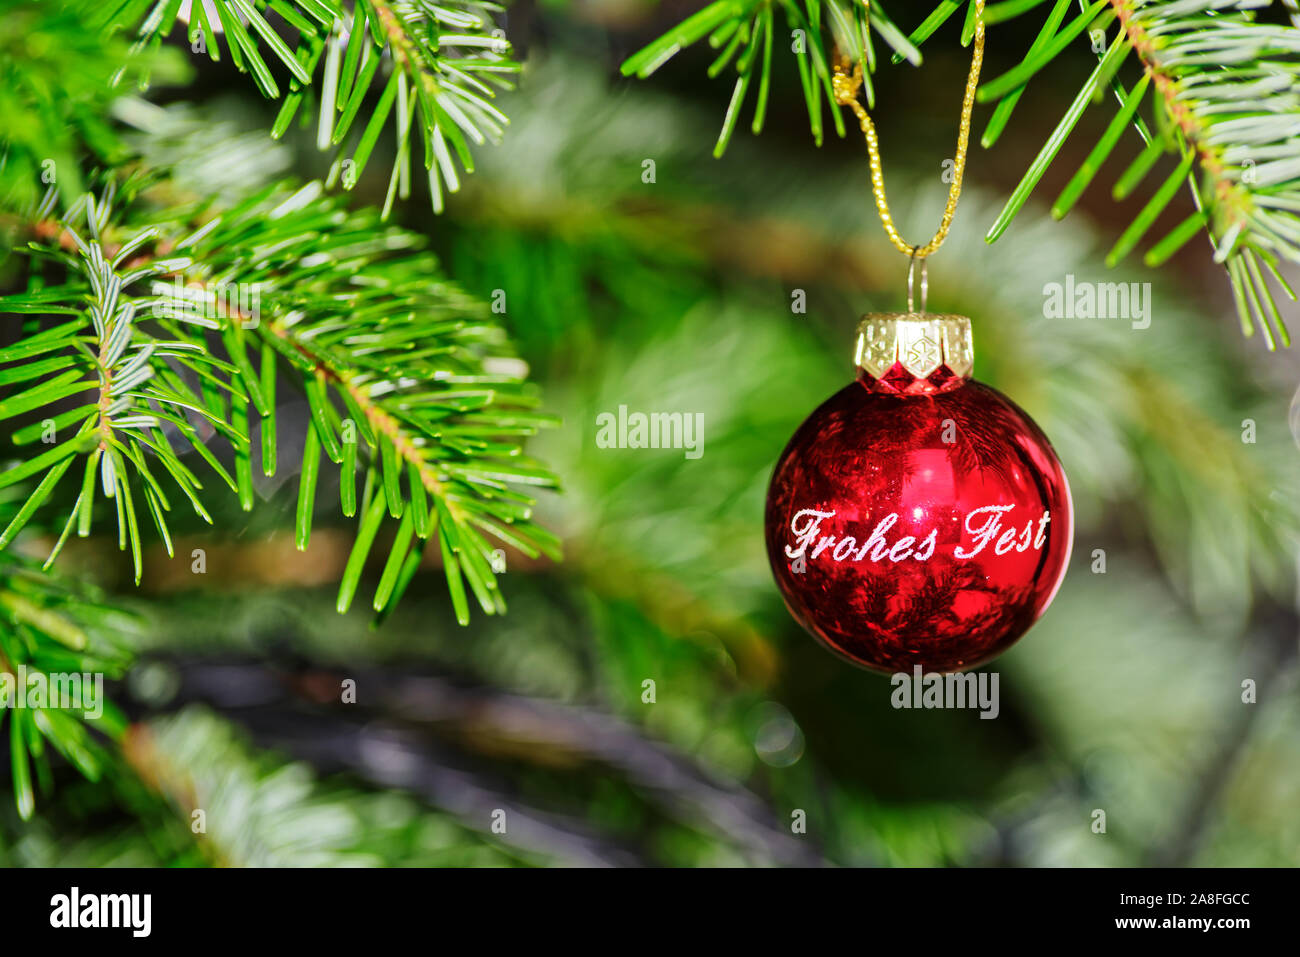 Red Christmas ball with Happy Holiday text in German hanging on fir branch Stock Photo